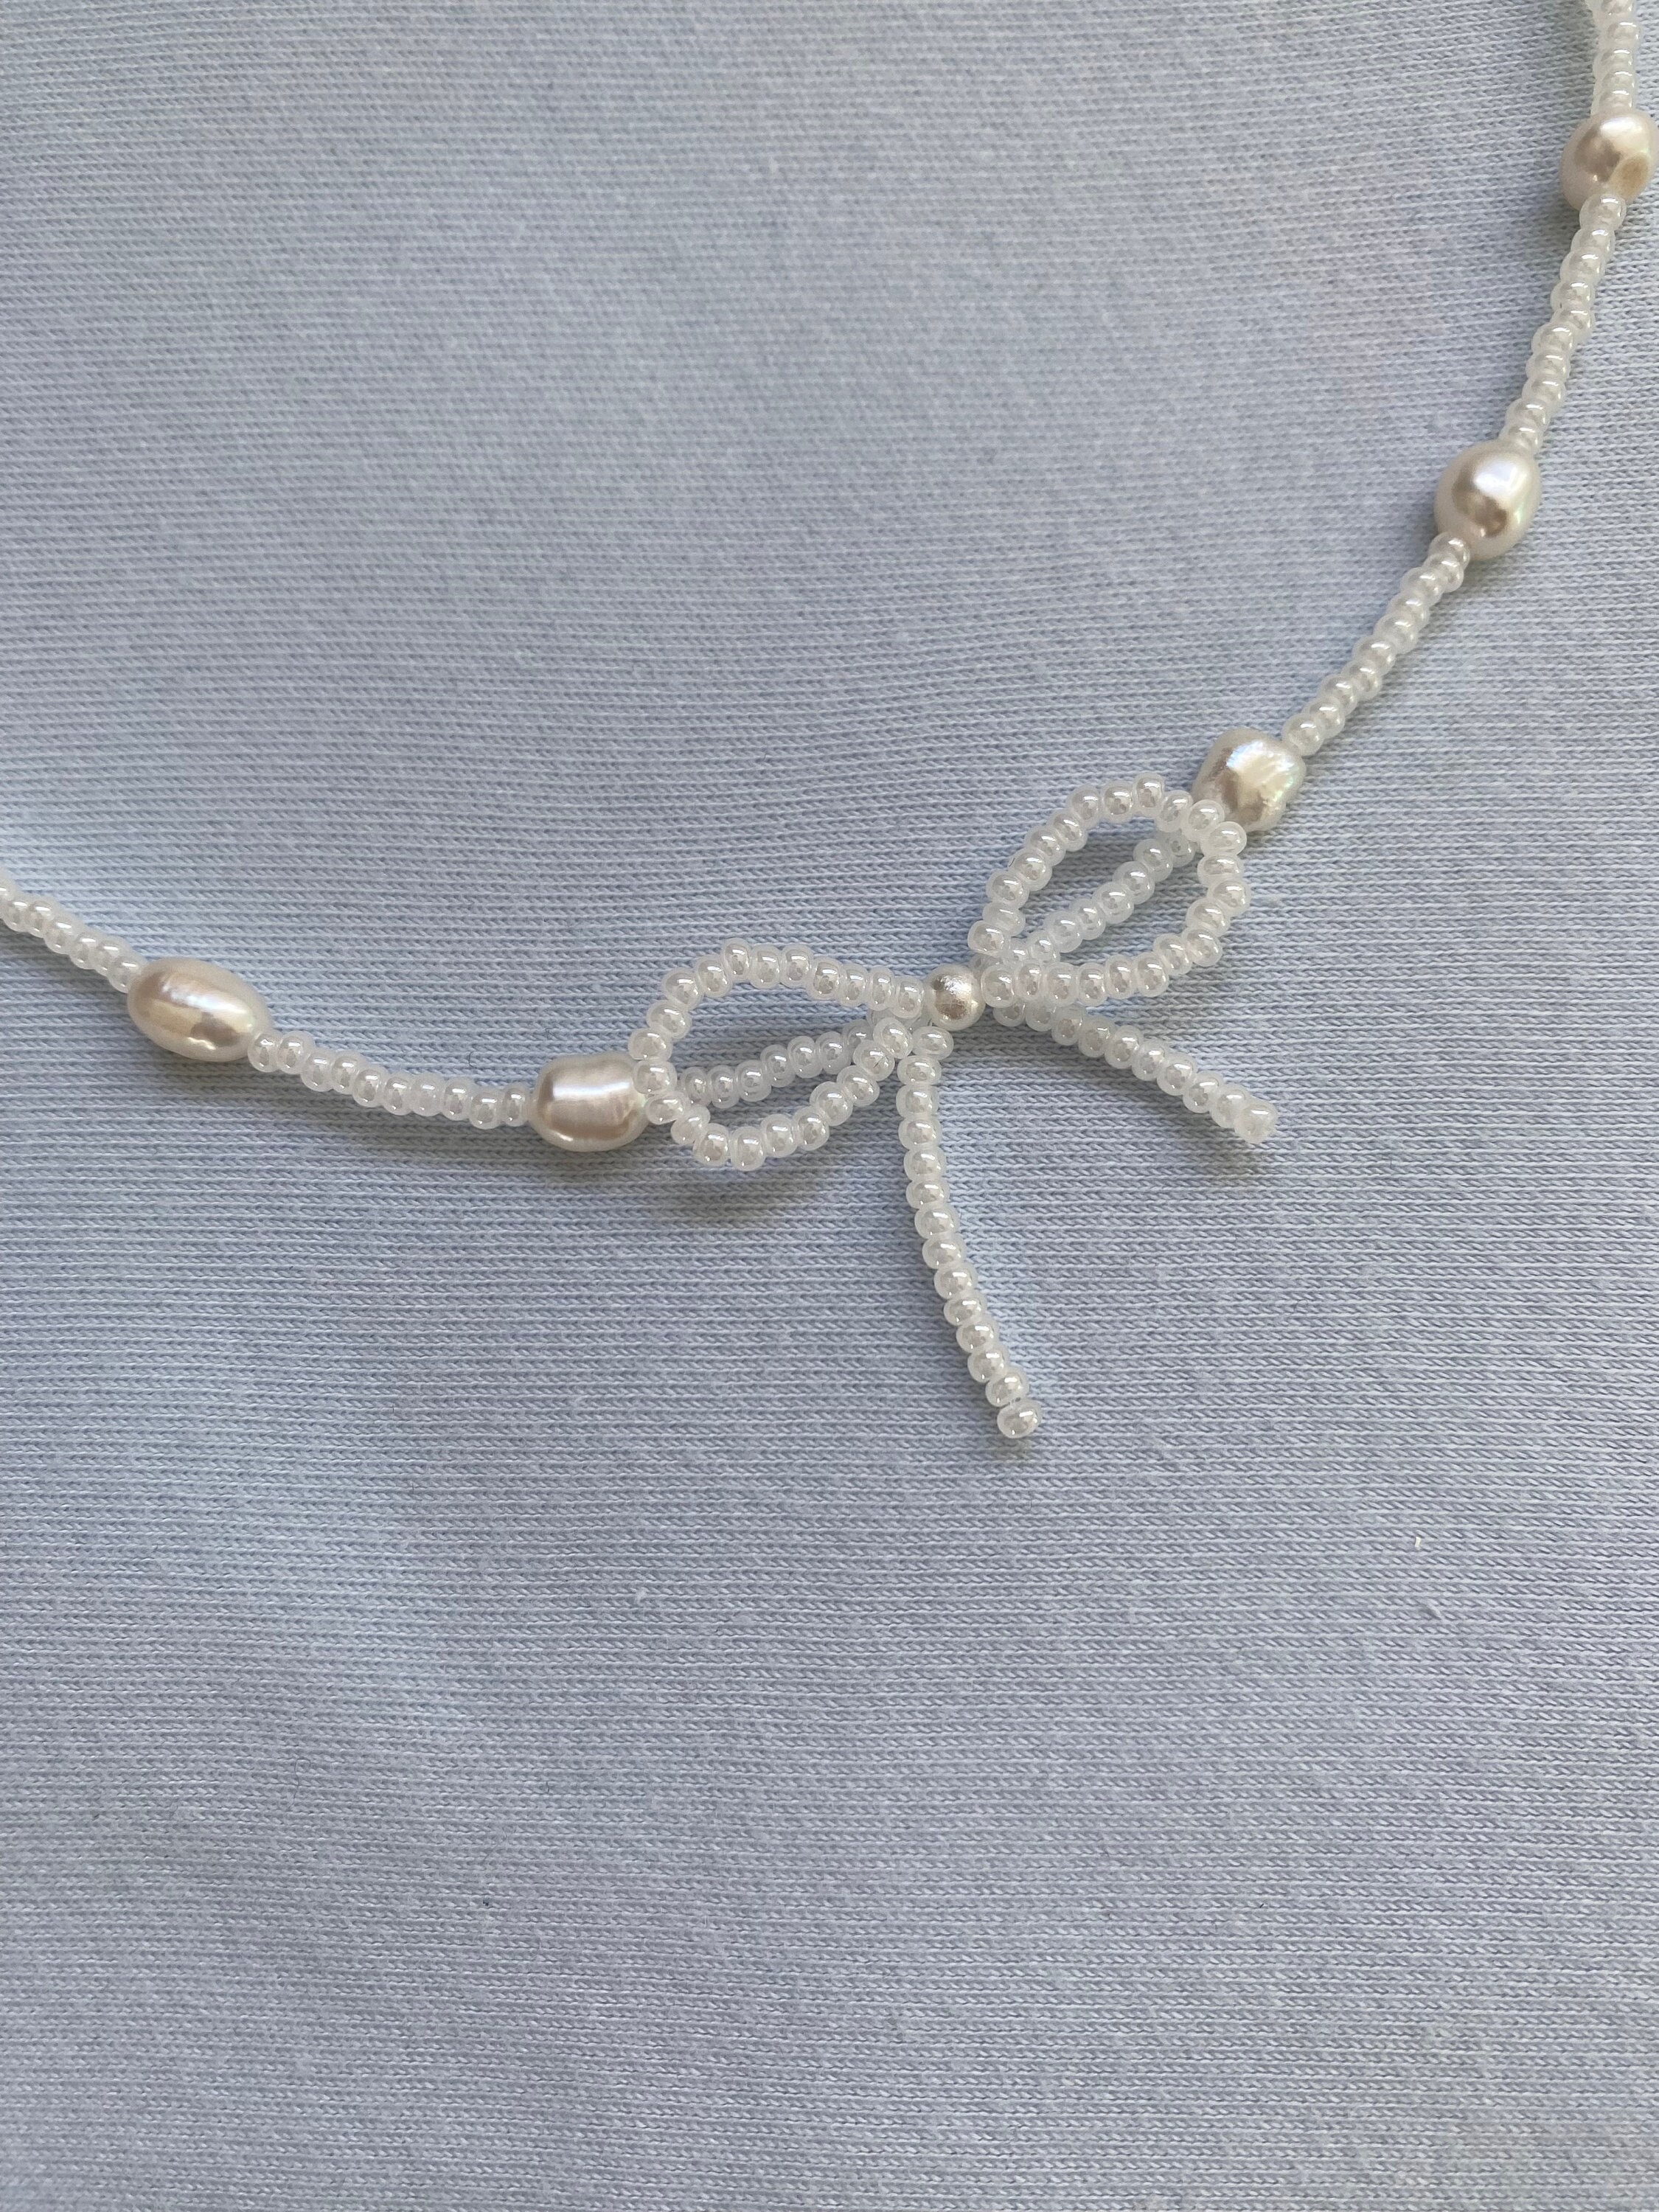 Cute Coquette Beaded Bow Necklace